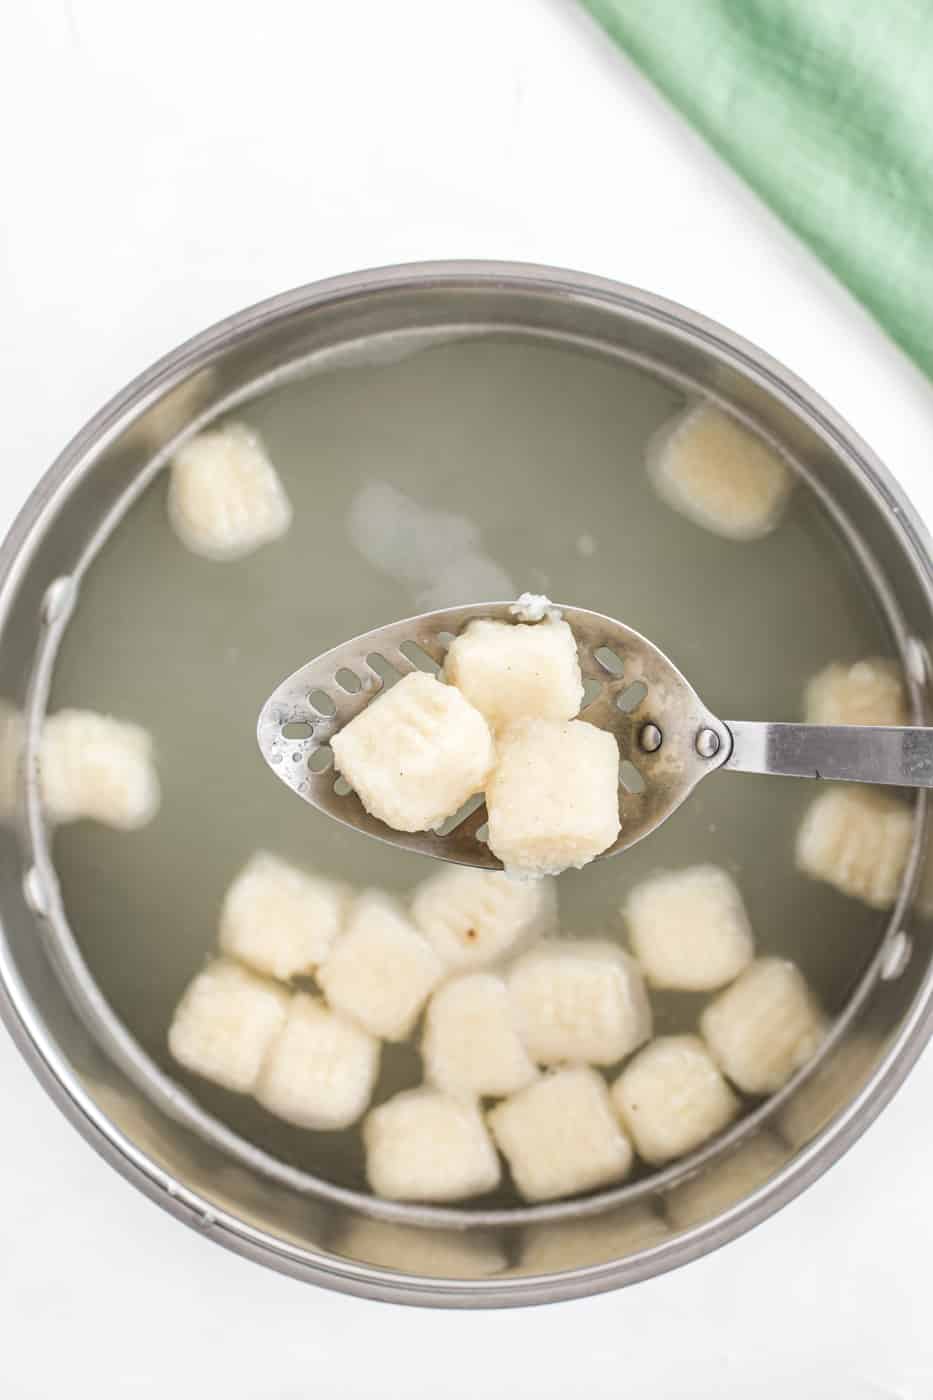 homemade gluten-free gnocchi boiled in water.